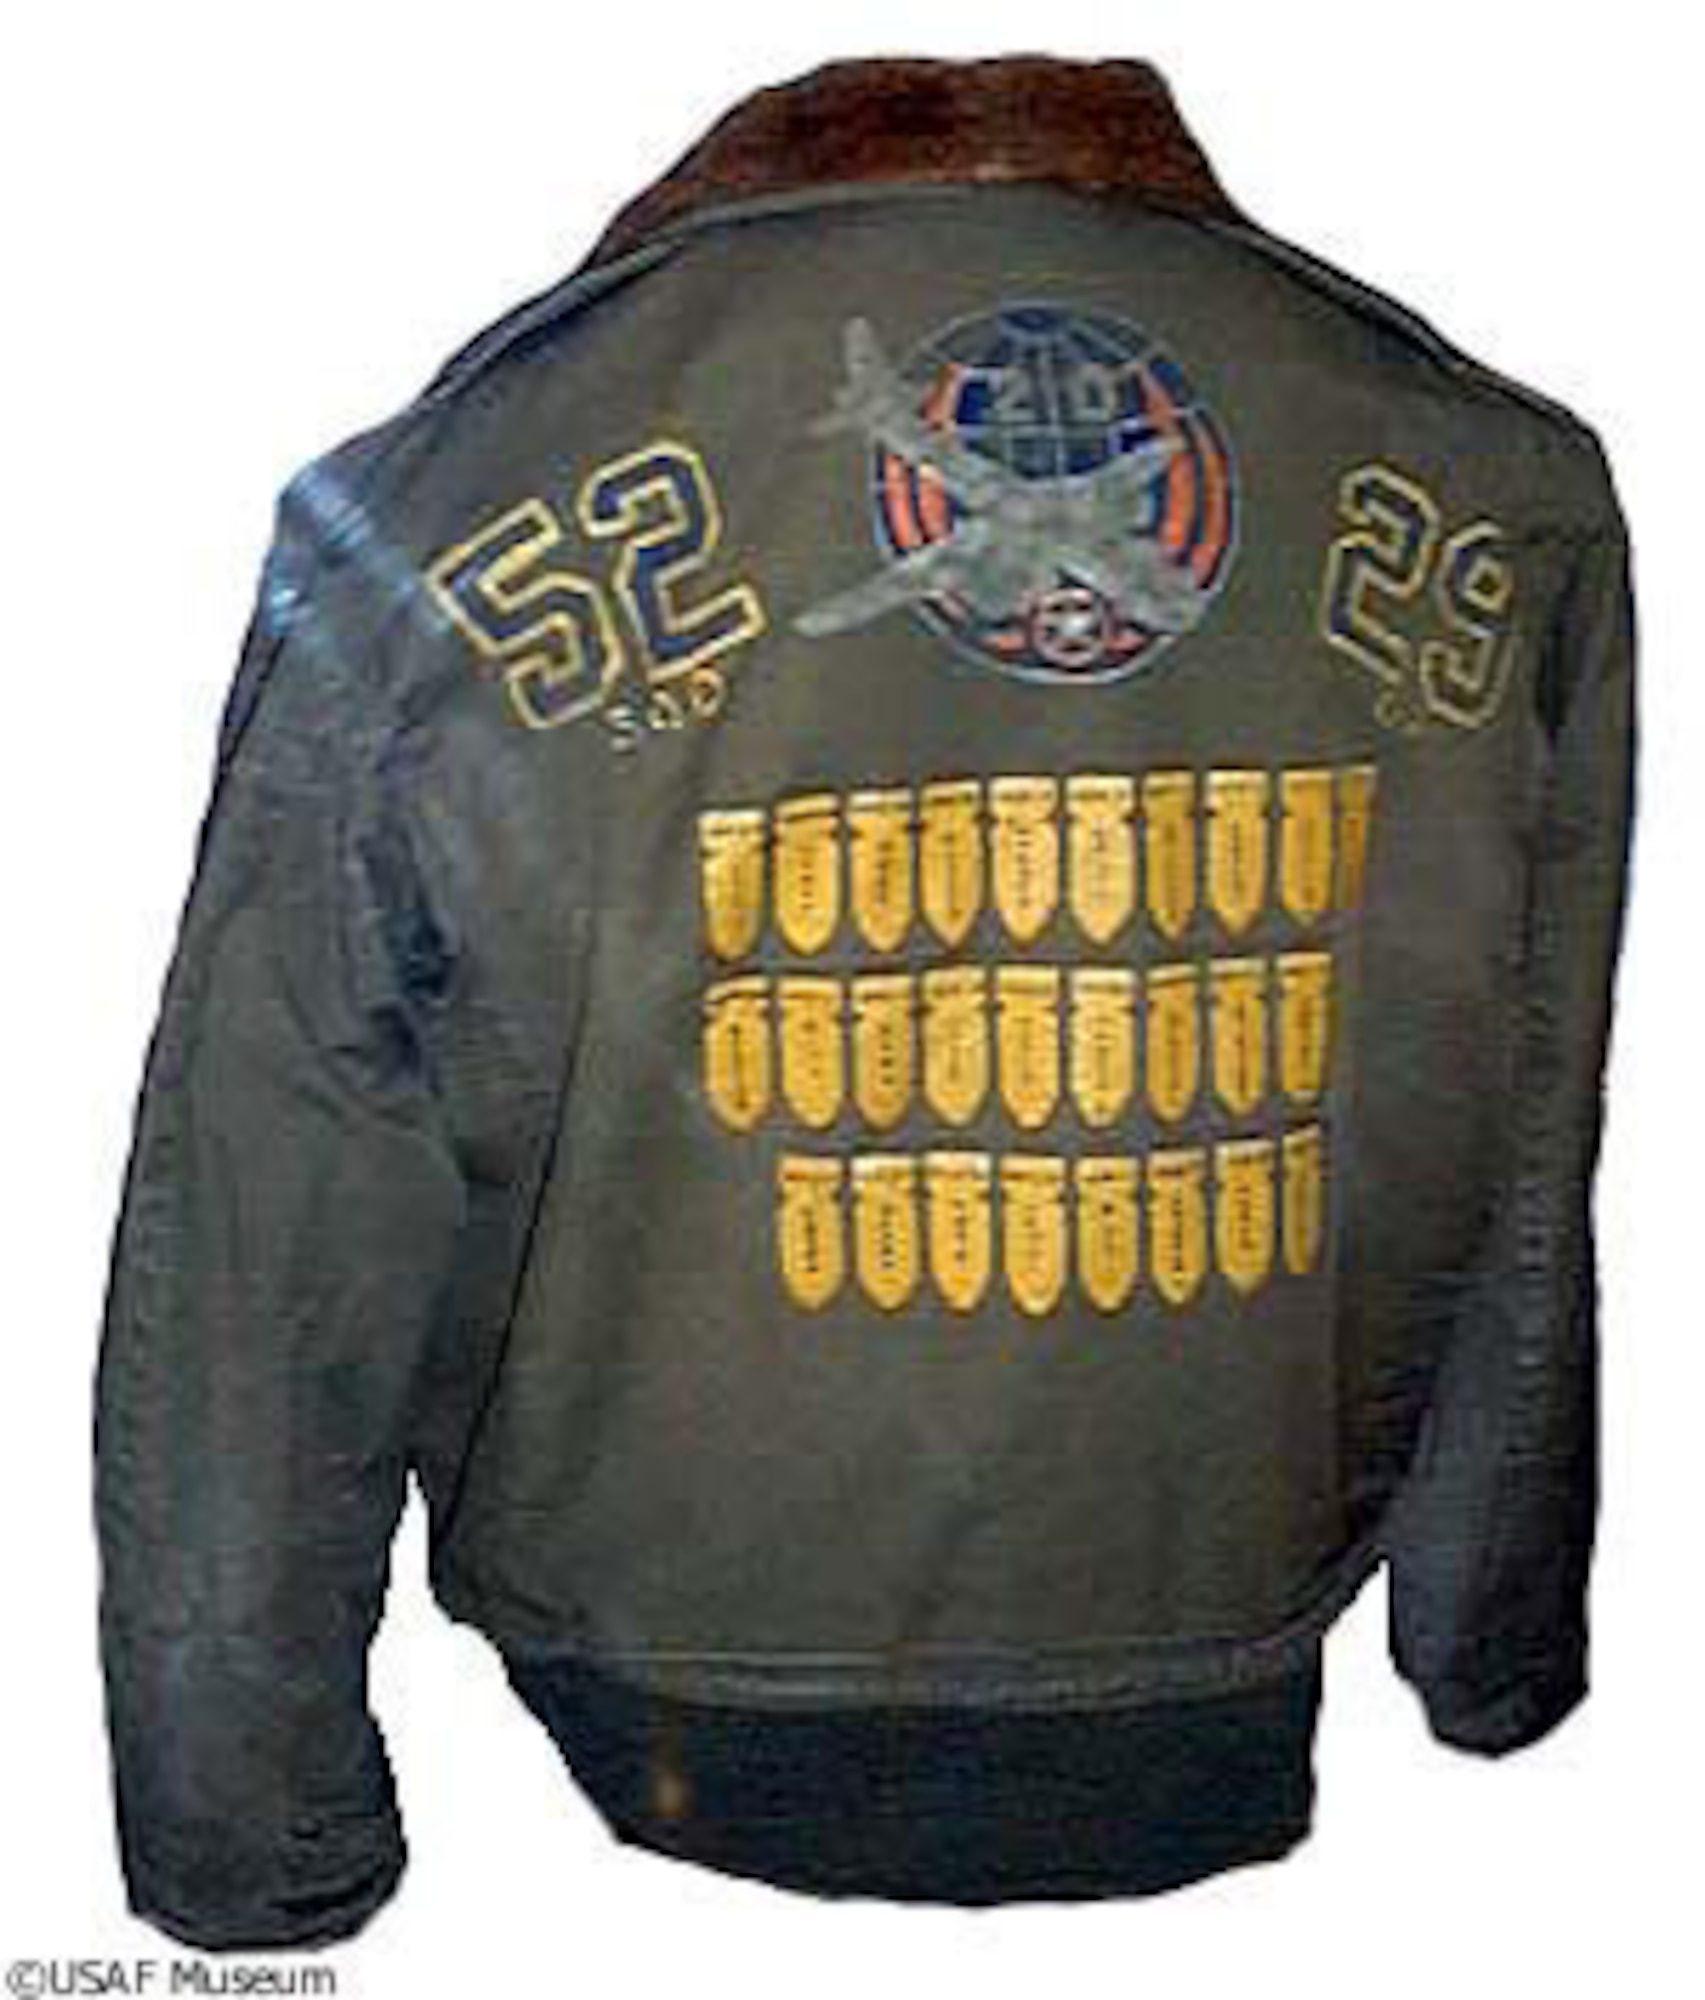 DAYTON, Ohio -- 52nd Bomb Squadron aviator jacket on display at the National Museum of the United States Air Force. (U.S. Air Force photo)